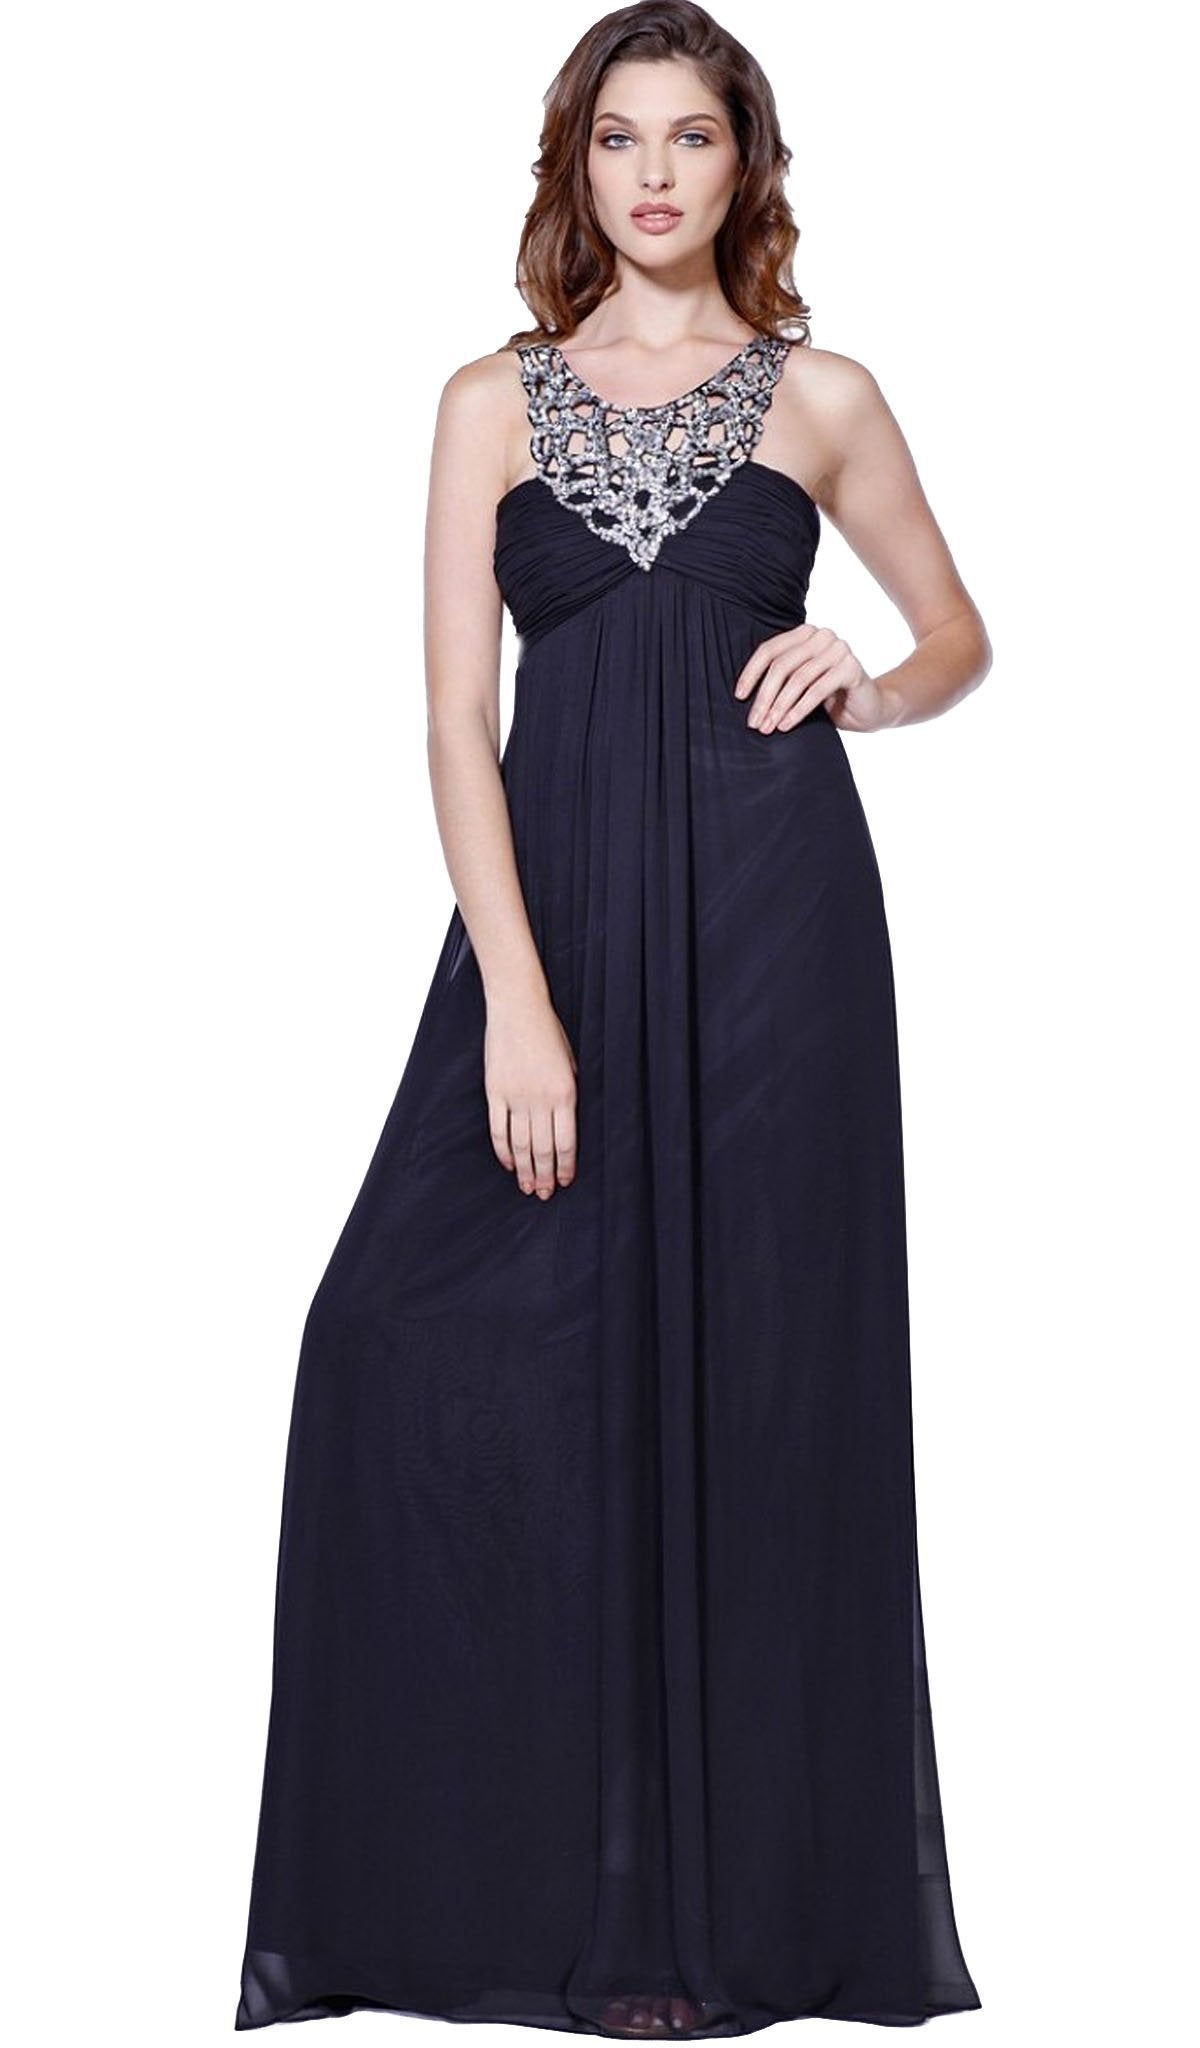 Nox Anabel - 2592 Embellished Scoop Neck Empire Waist Evening Dress Special Occasion Dress XS / Black